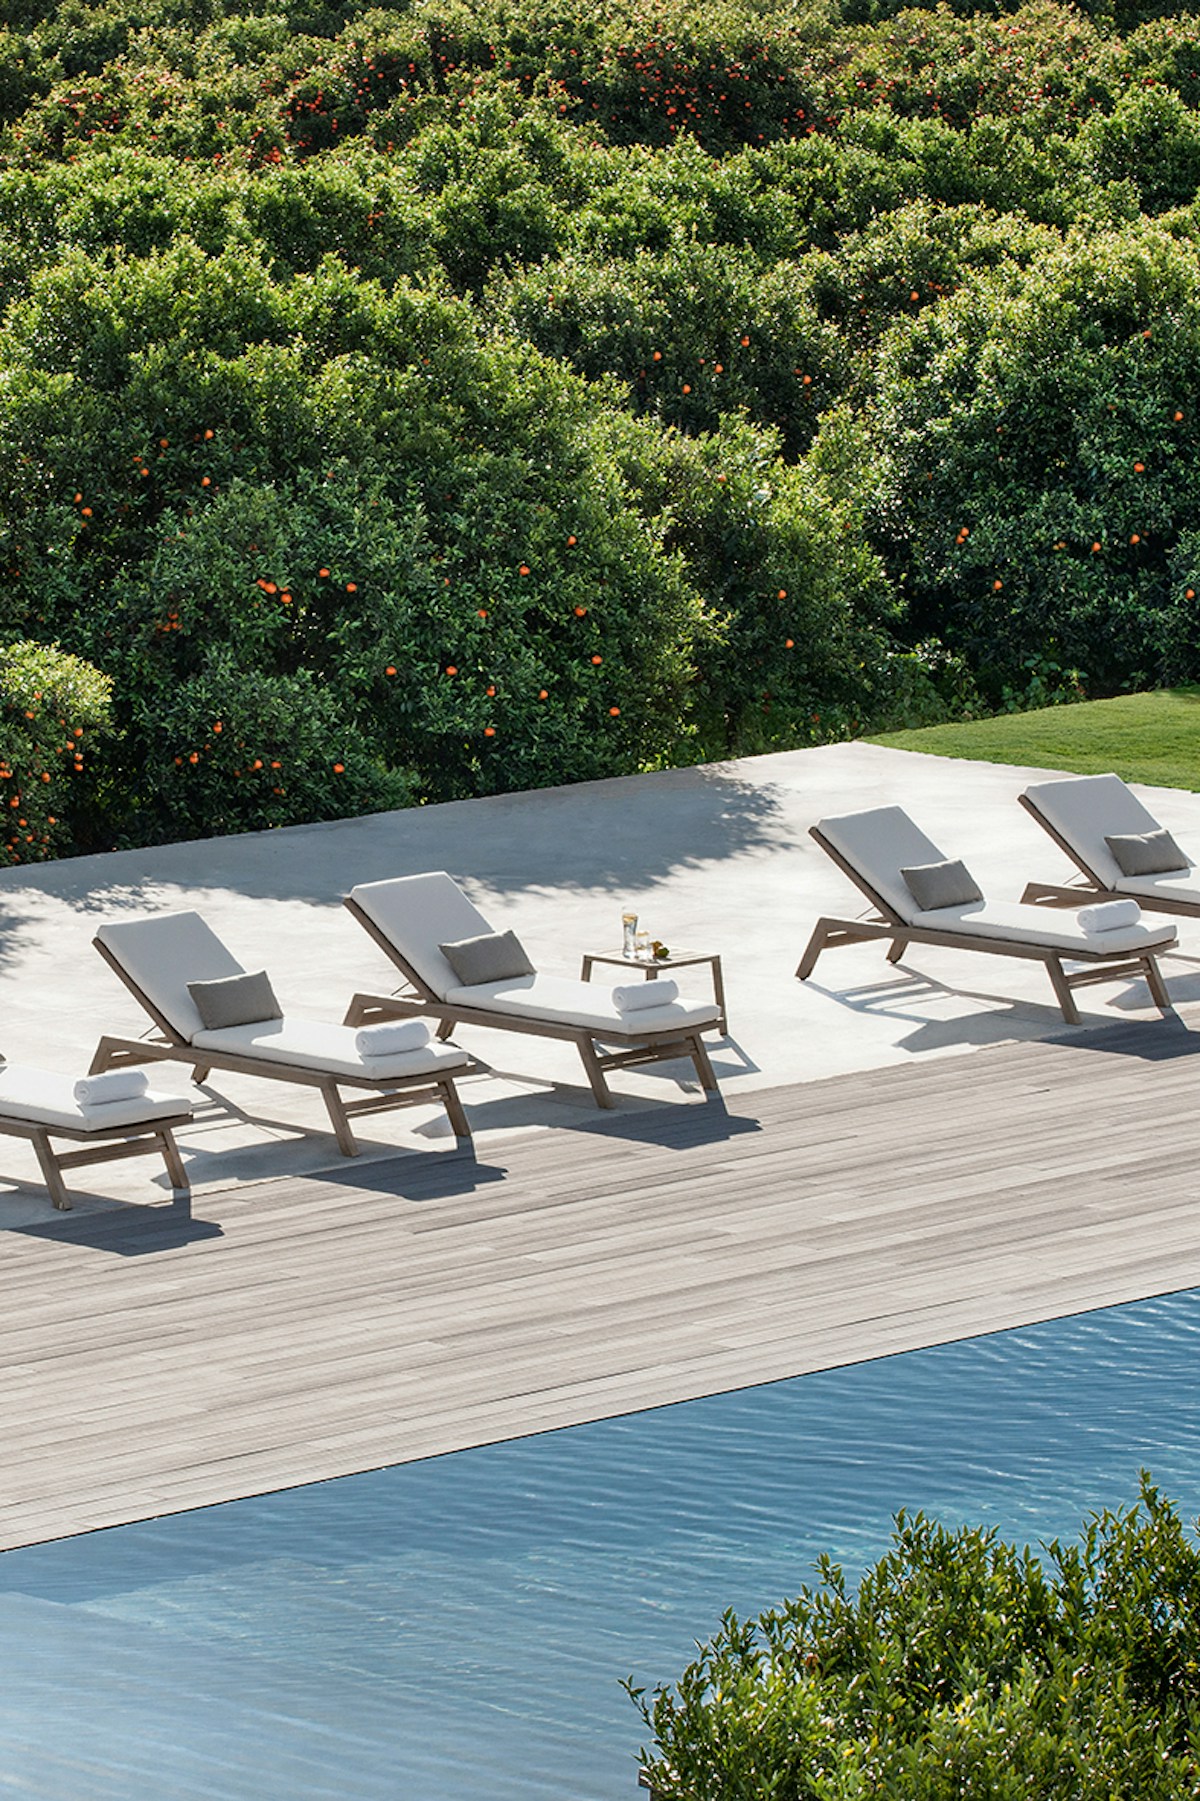 Ethimo Costes Outdoor Sunbed against Italian country setting